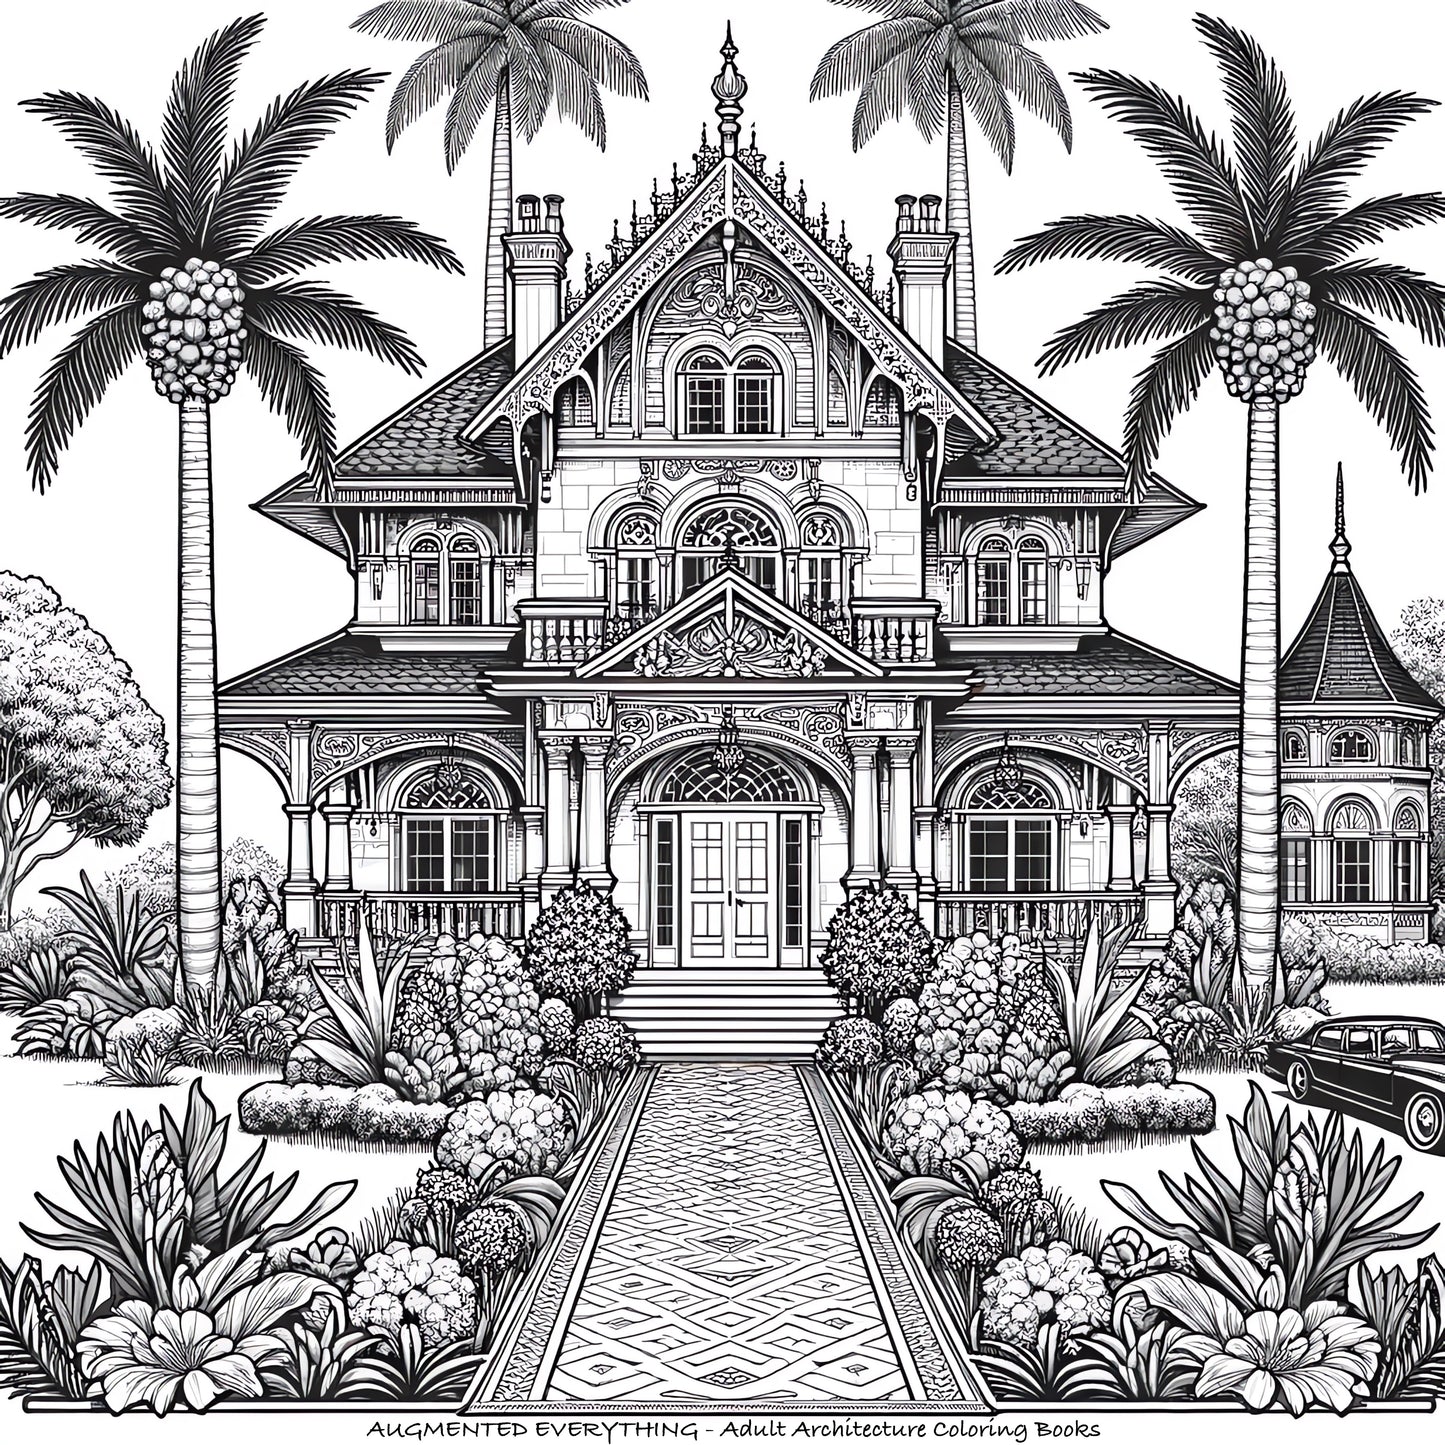 Relaxing Architecture Coloring Book for Adults - The Grand Mansion - Digital Download